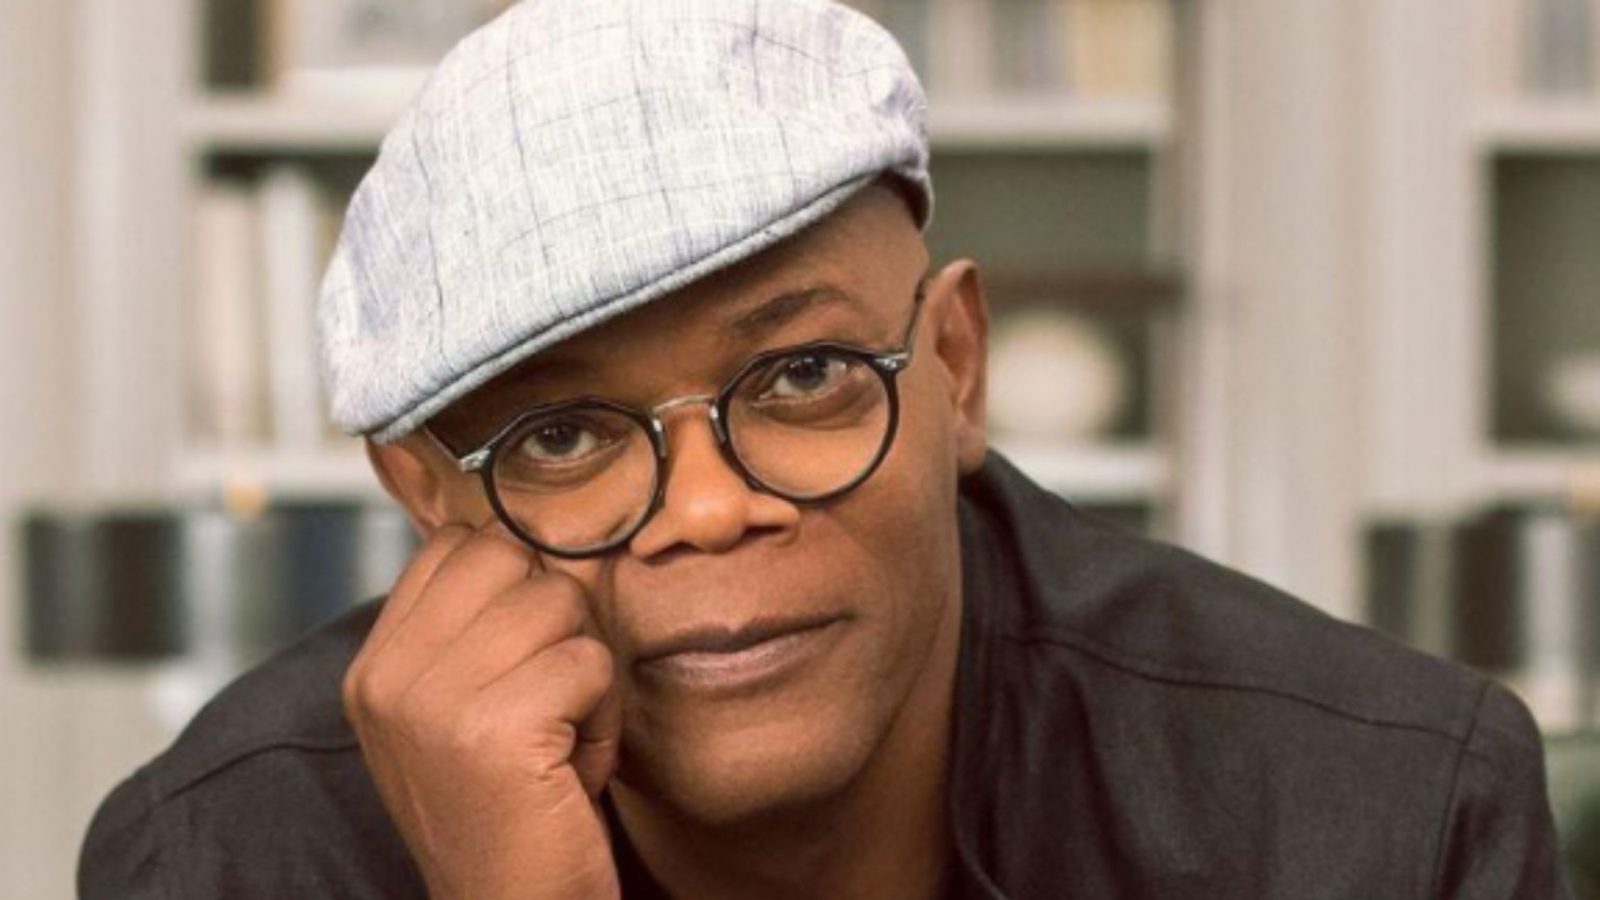 🐕 Help These Celebrities Adopt a Dog to Find Out Who Your Celeb BFF Is Samuel L. Jackson